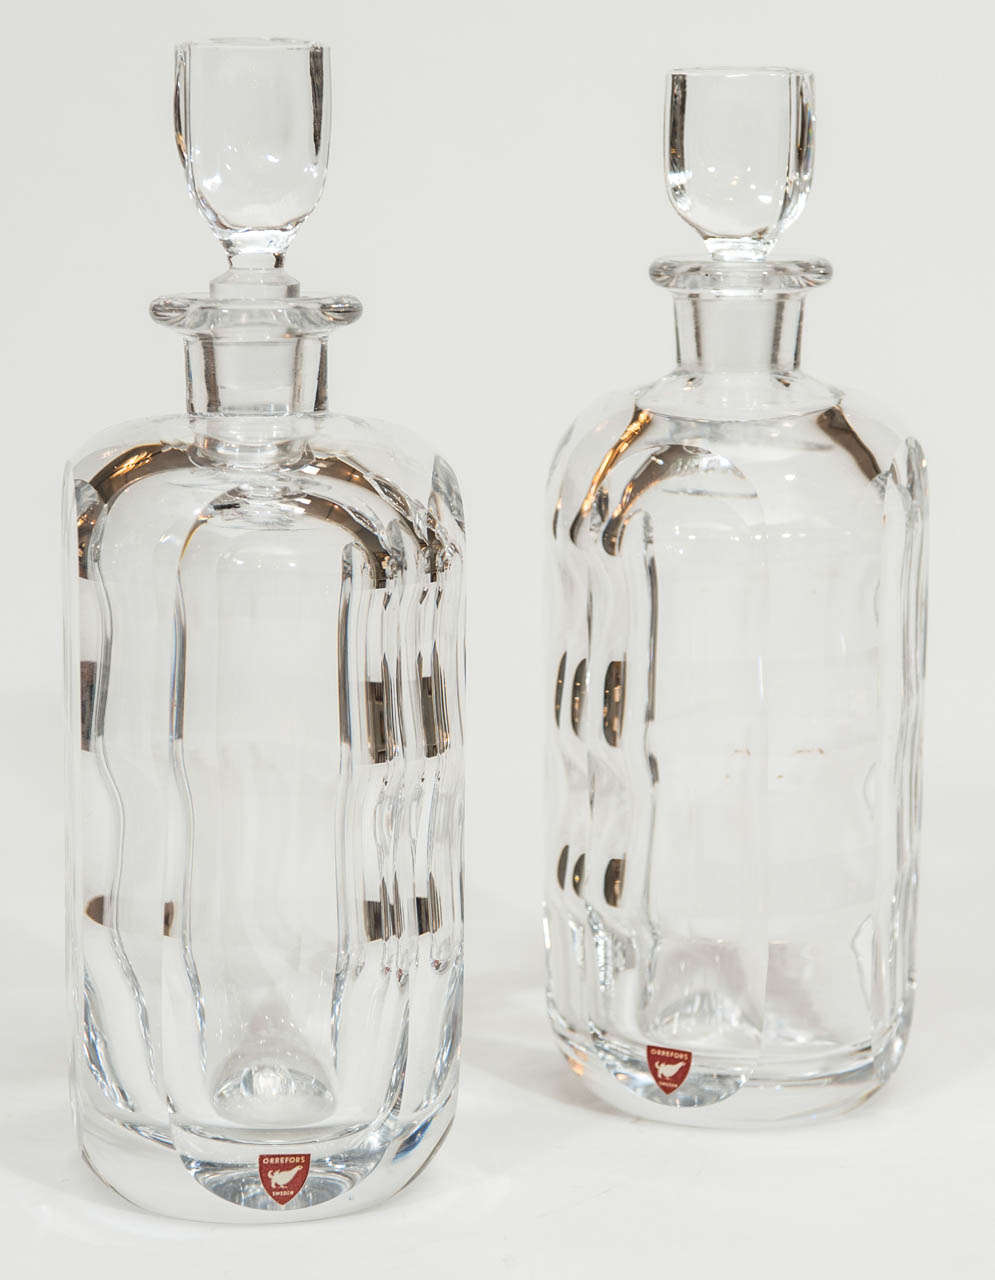 An immaculate pair of cut crystal decanters in
a modernist style. These stunning decanters were
are from a prominent Toronto home and were never
used....a great holiday gift !